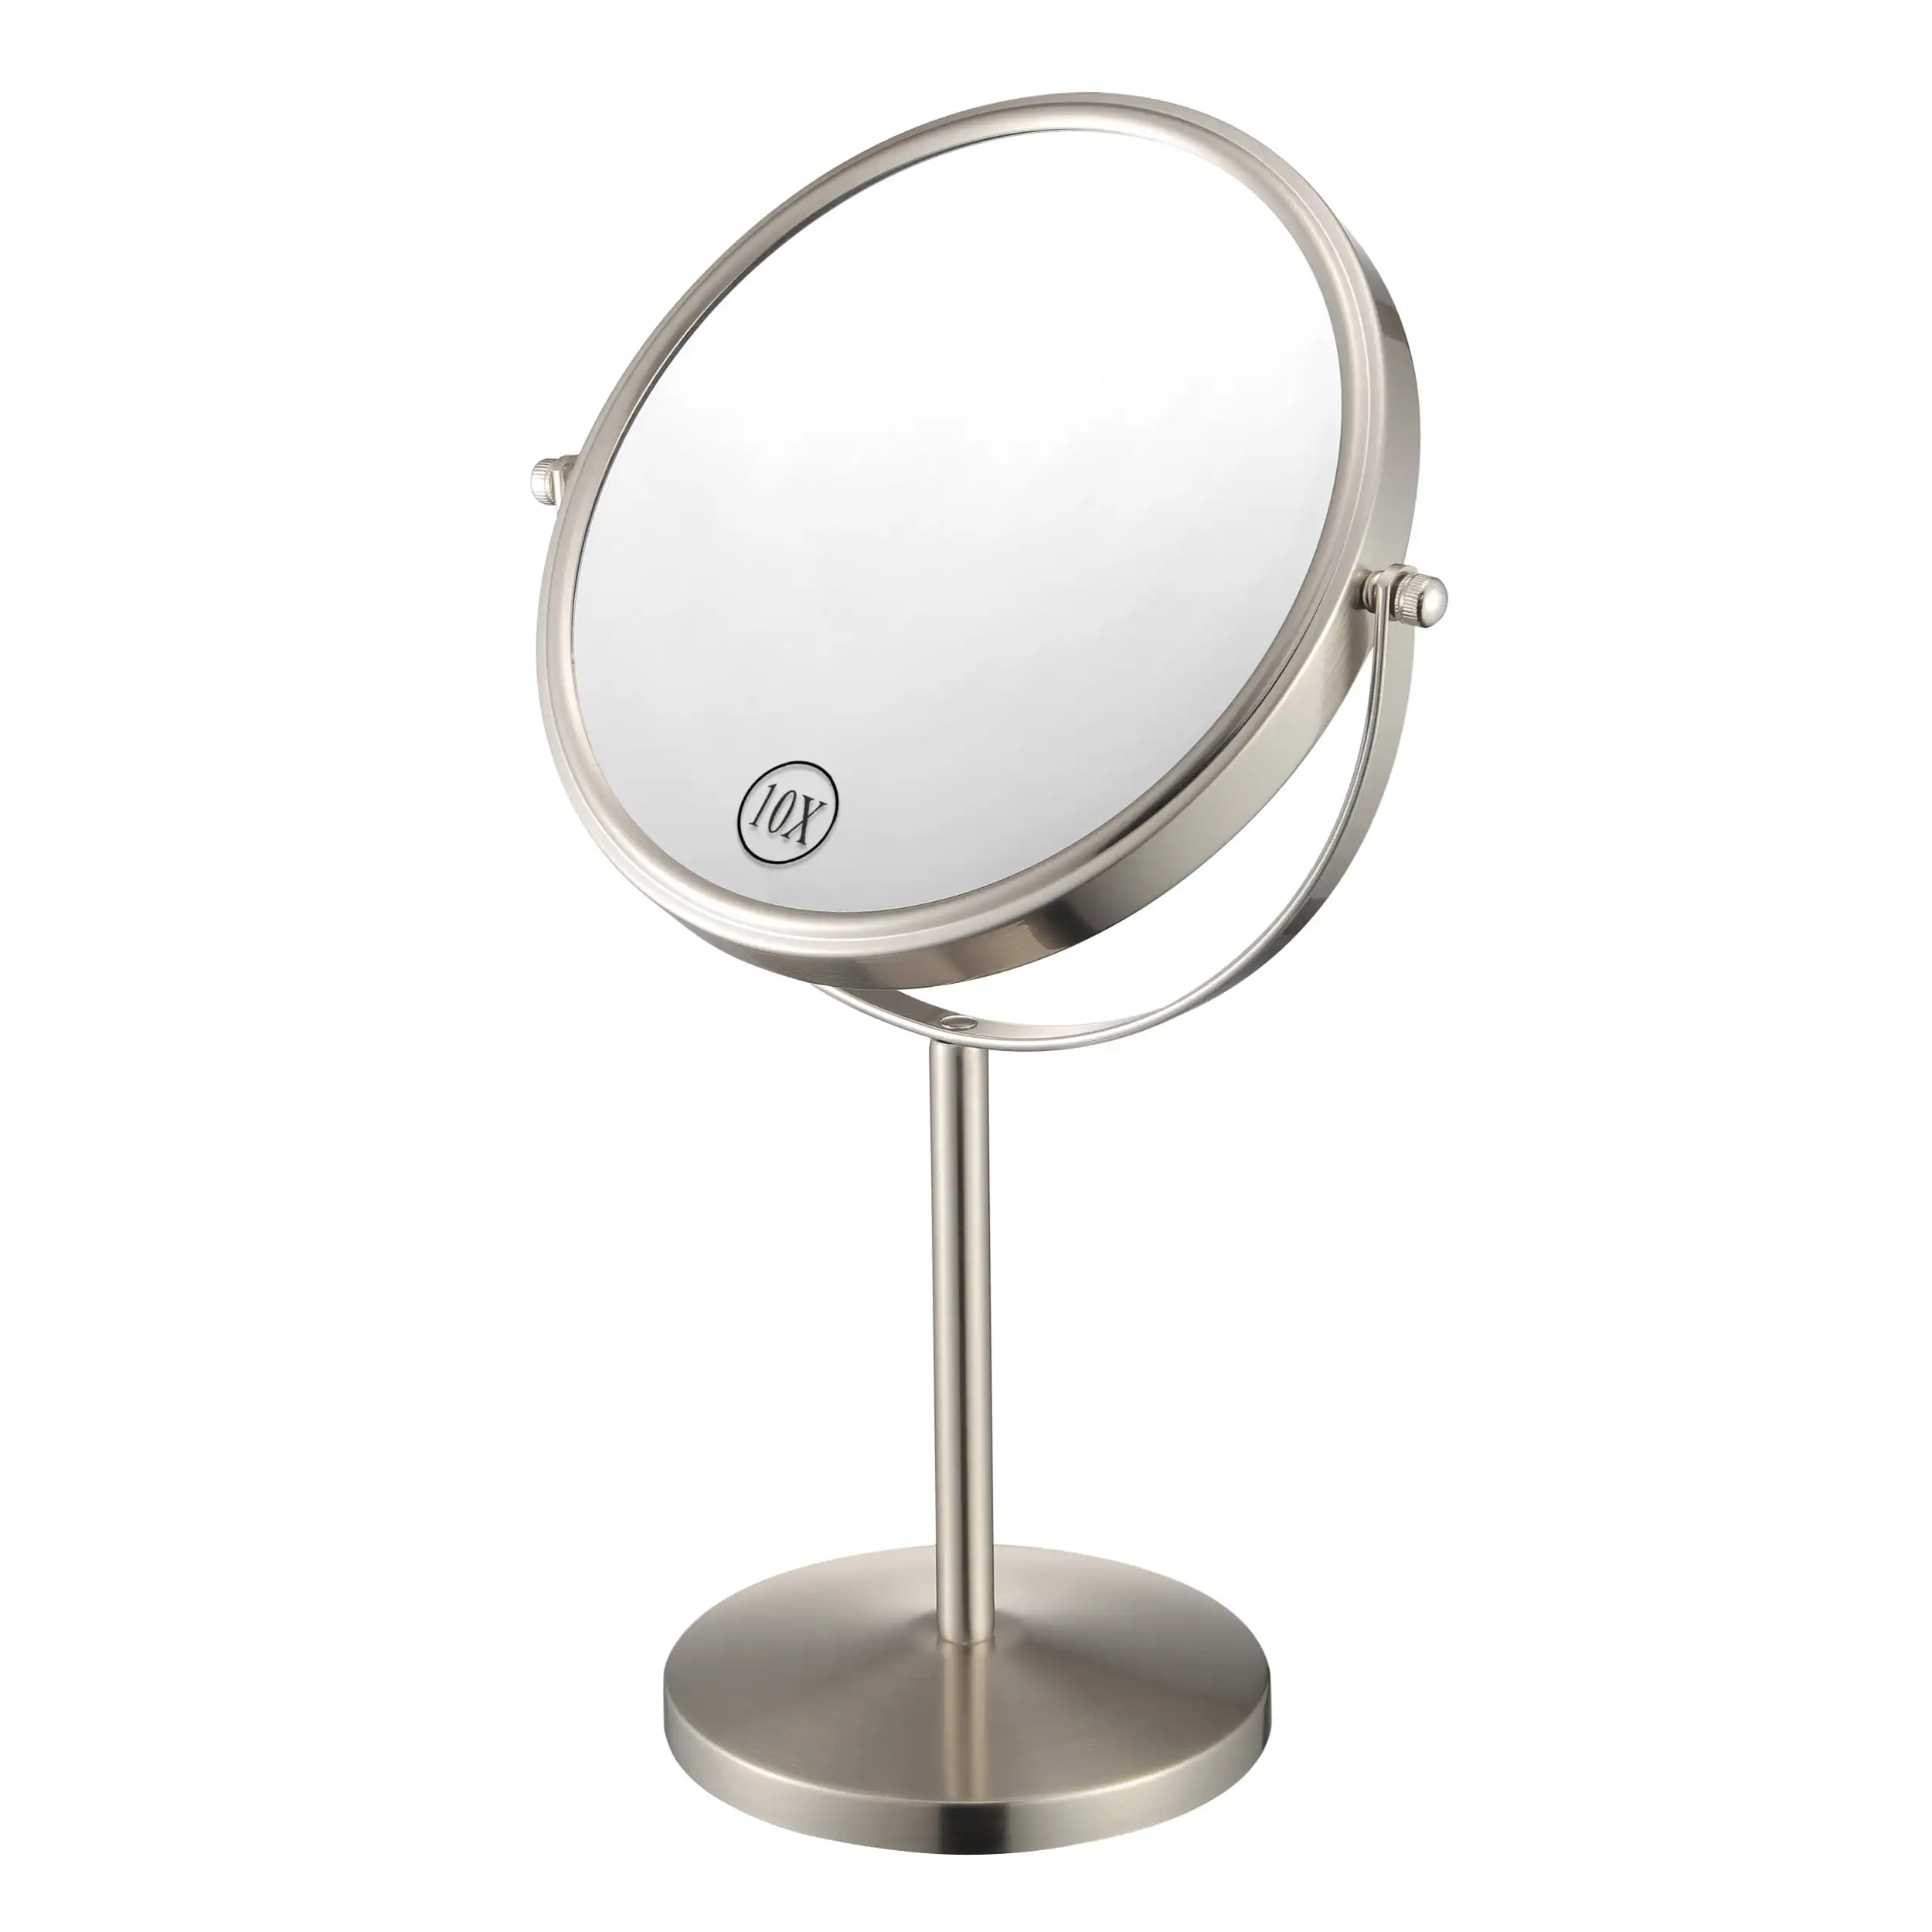 

Magnifying Makeup Mirror, 8 Inch Double Sided Vanity Tabletop Mirror with 10X Magnification, Nickel Finished